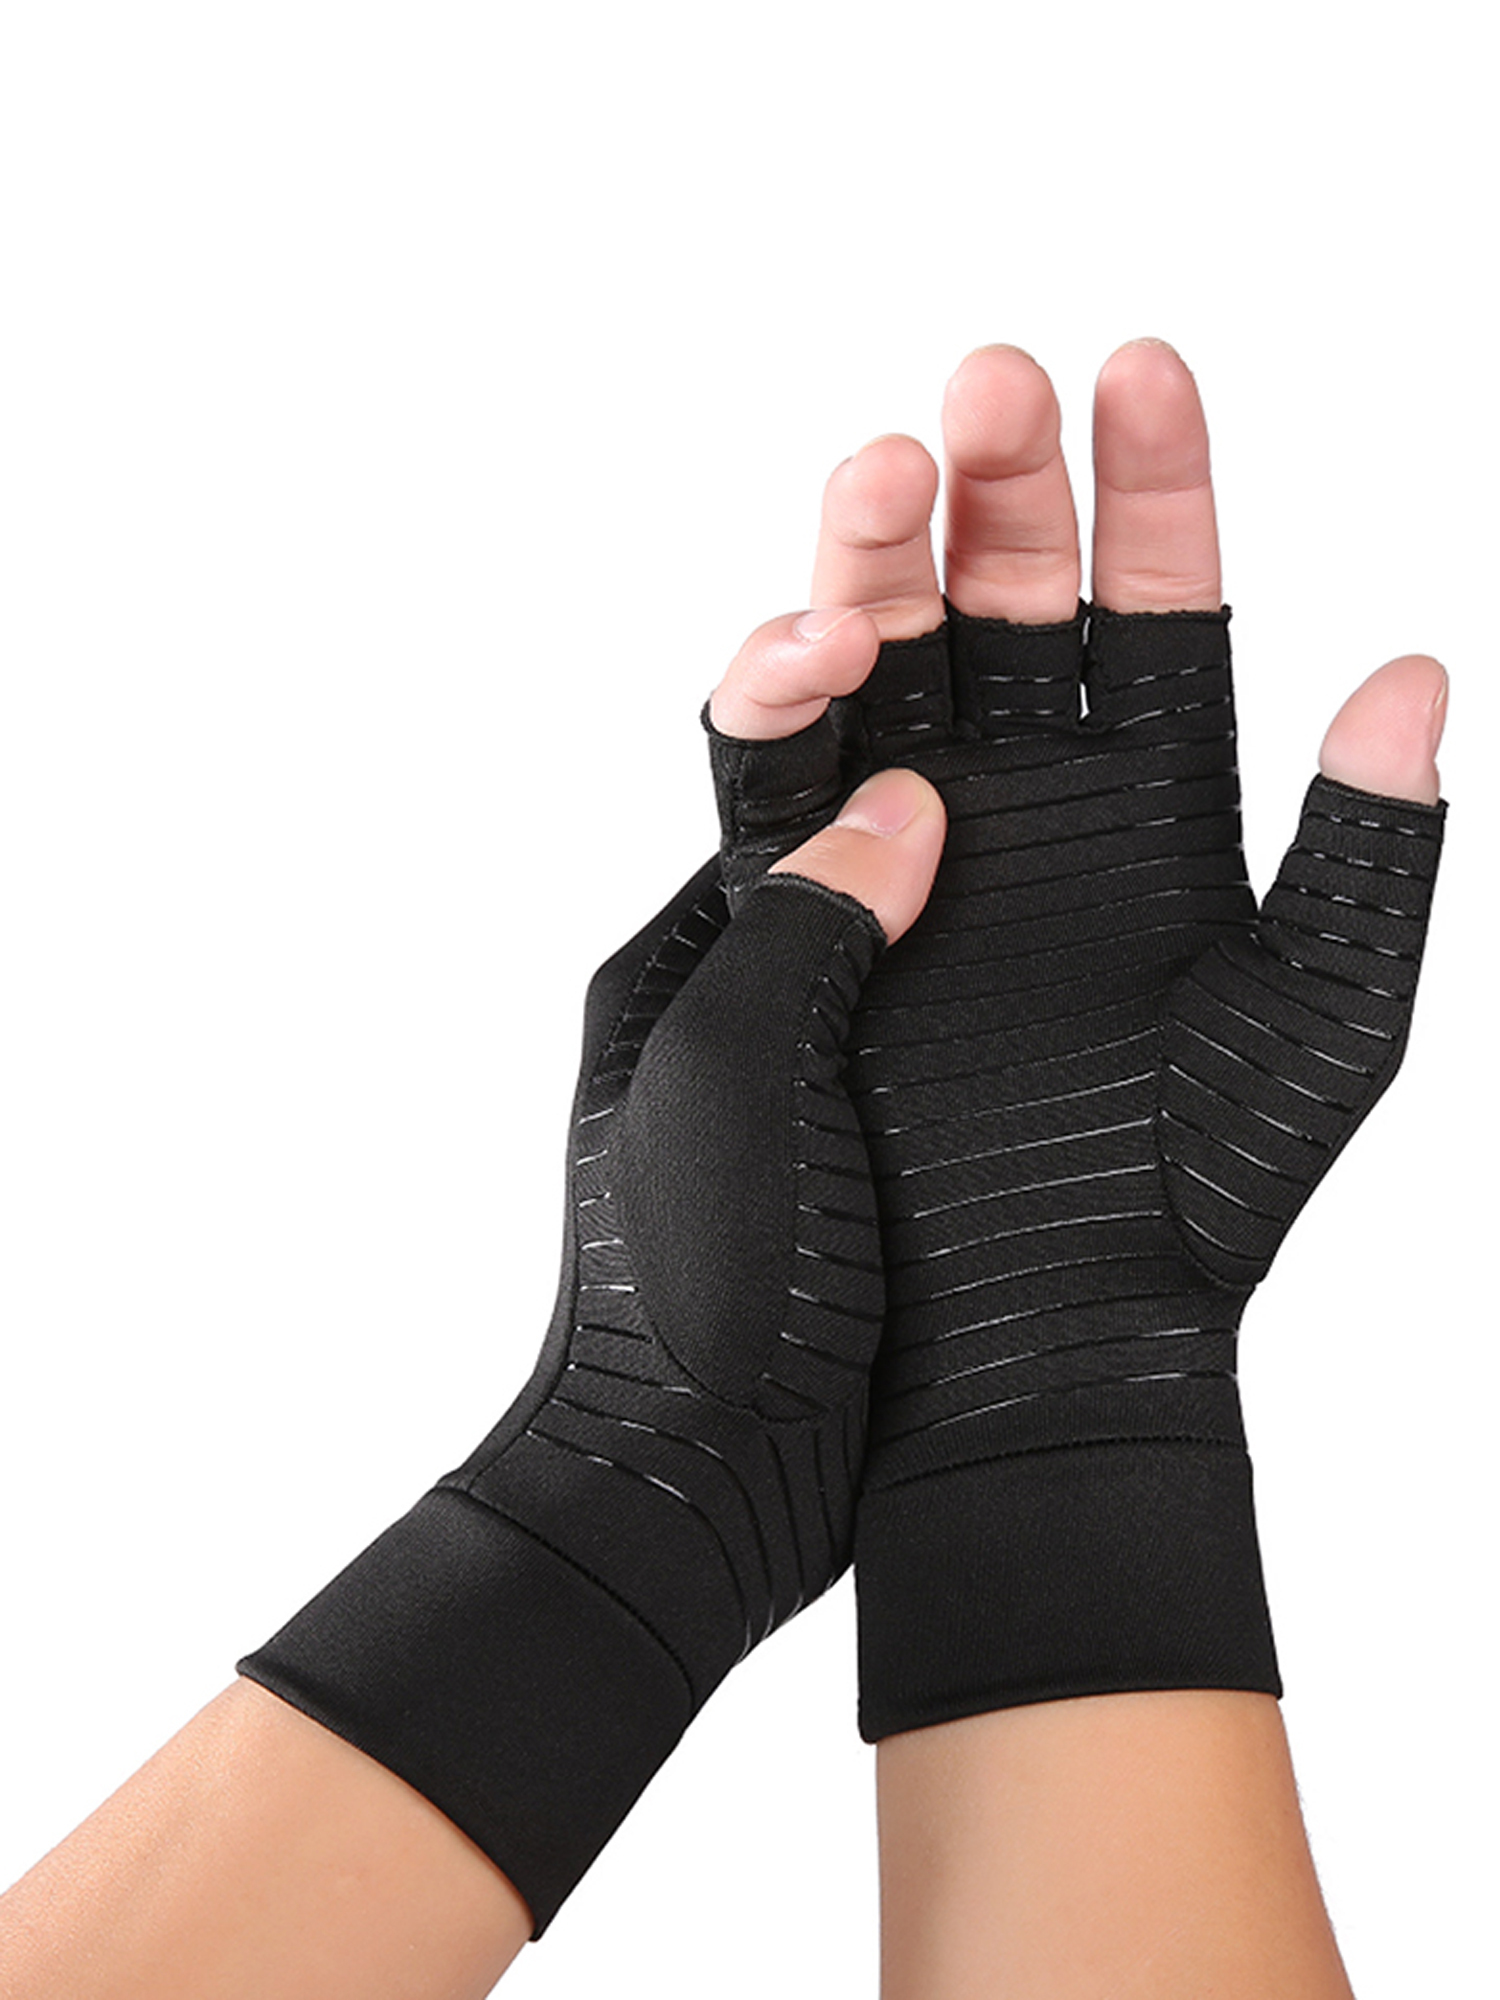 carpal tunnel gloves for wrist pain